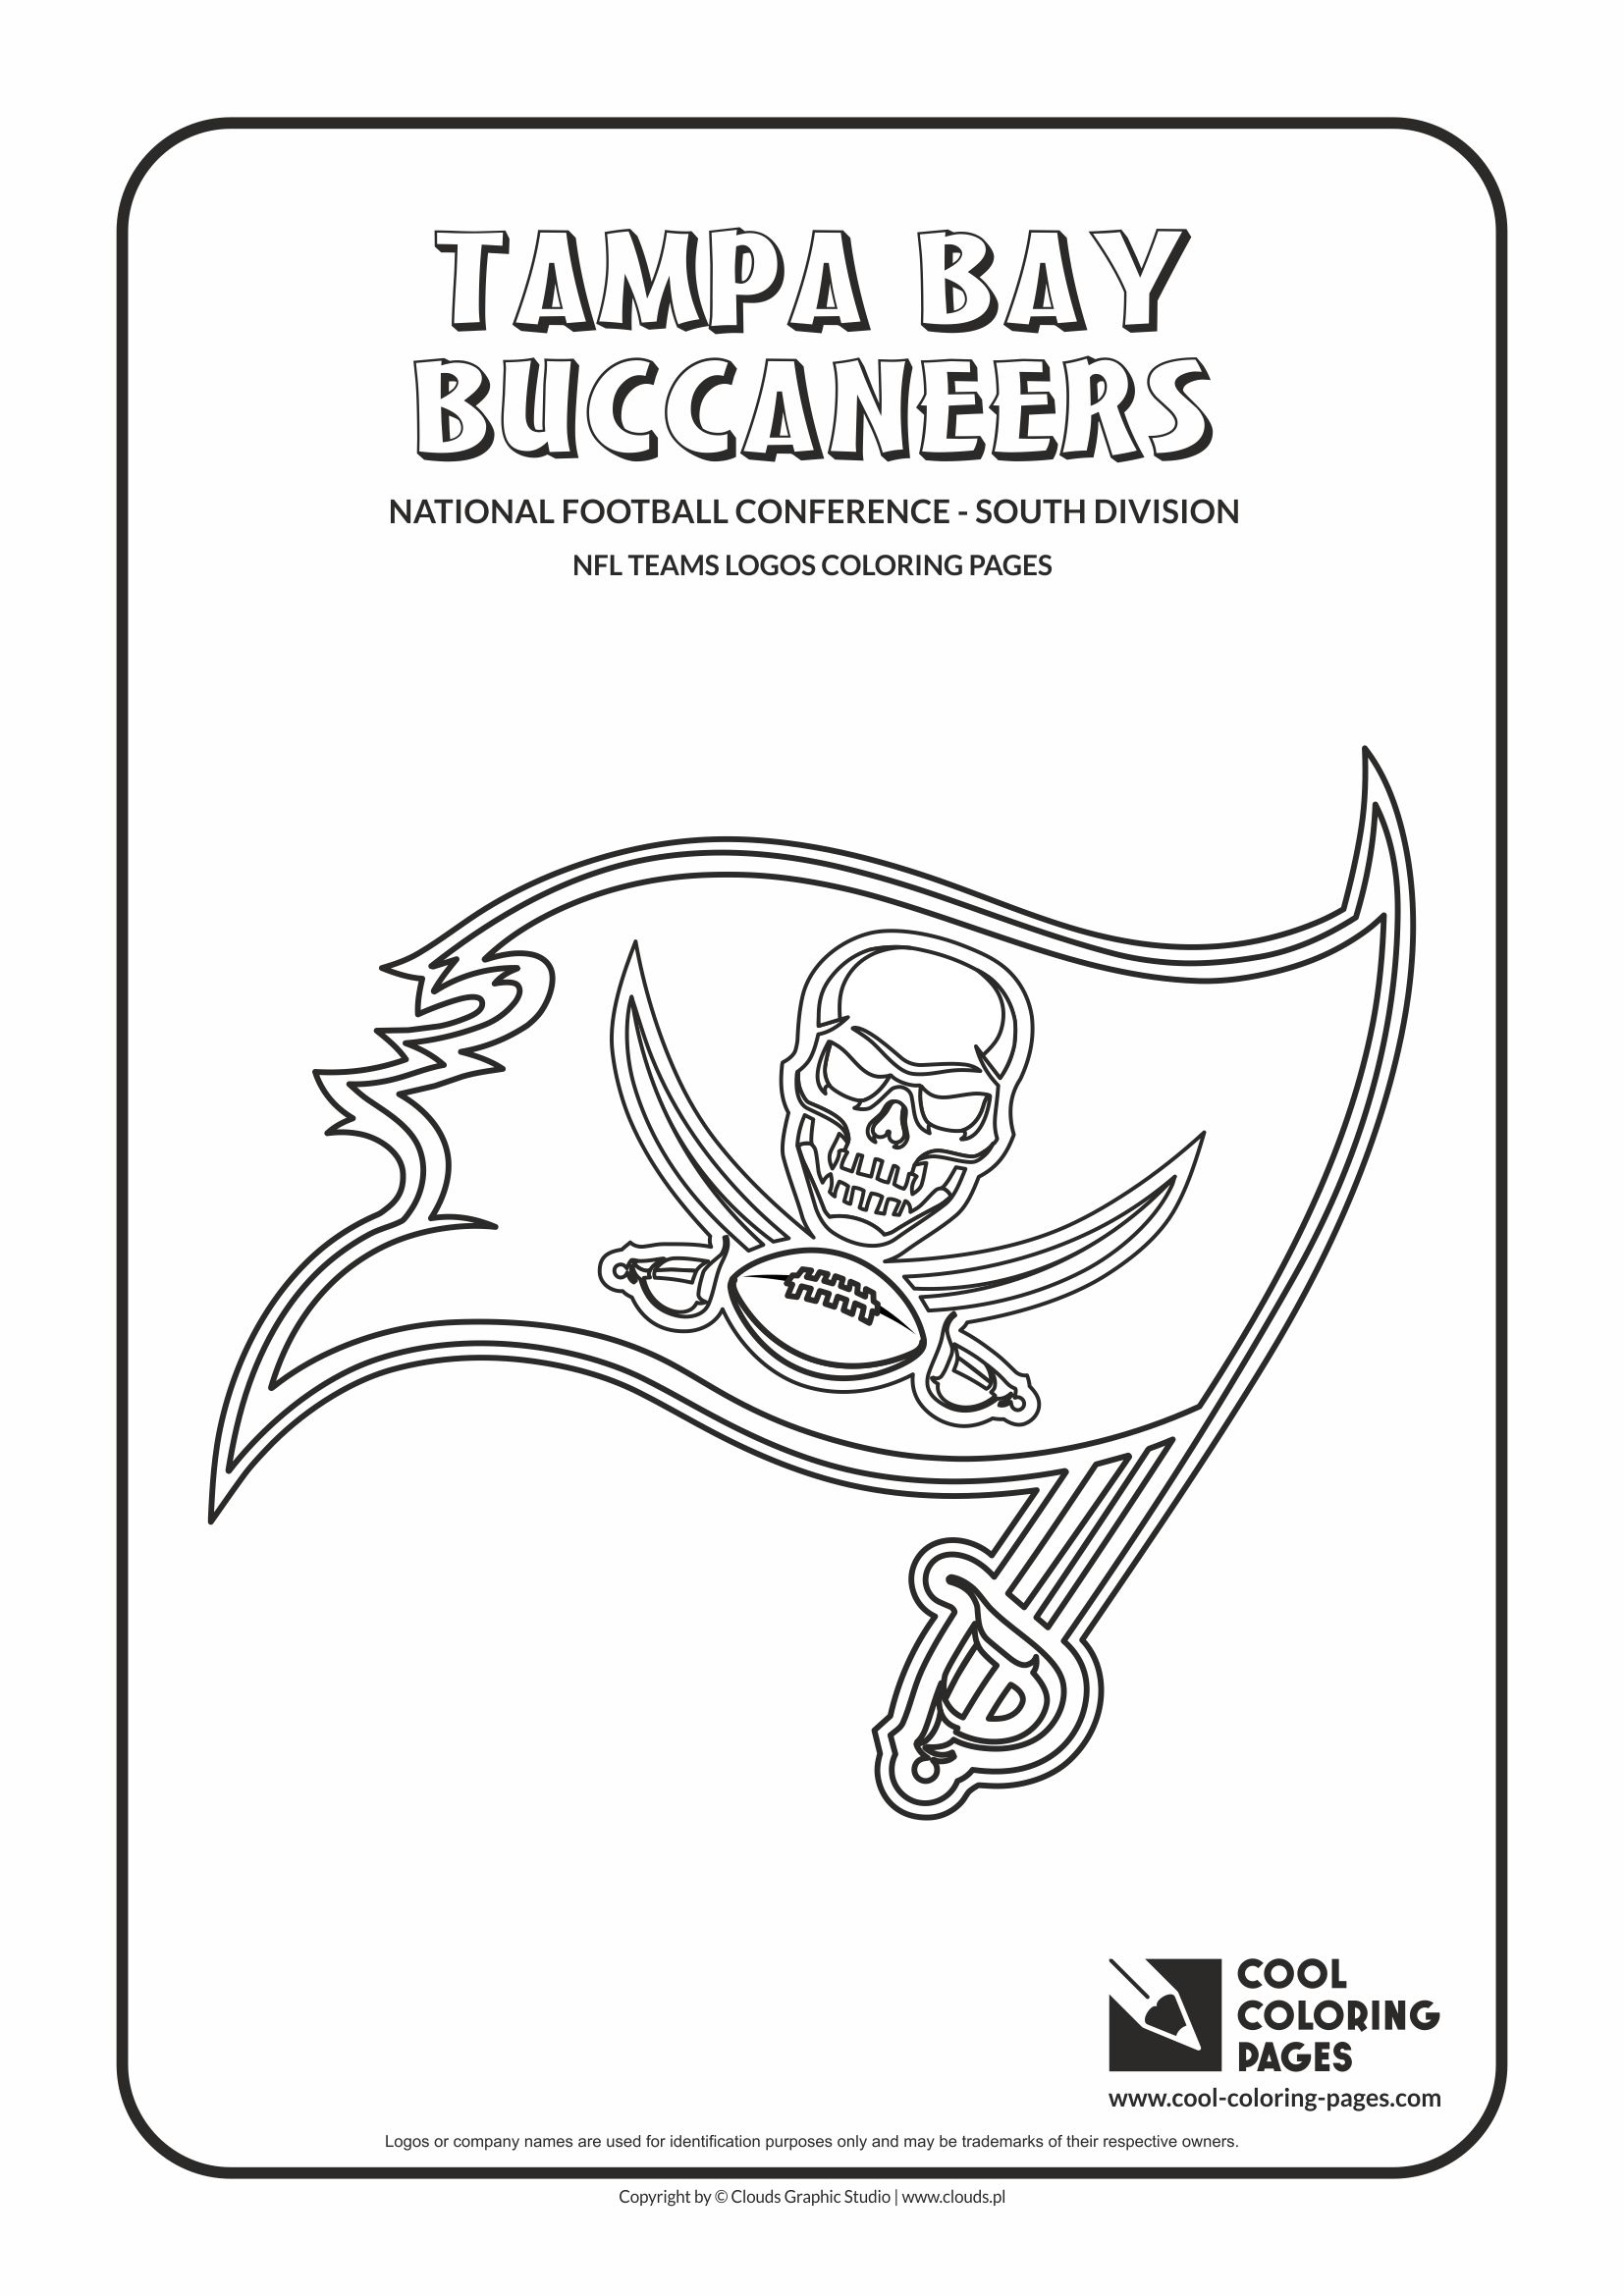 Cool Coloring Pages - NFL American Football Clubs Logos - National Football Conference - South Division / Tampa Bay Buccaneers logo / Coloring page with Tampa Bay Buccaneers logo